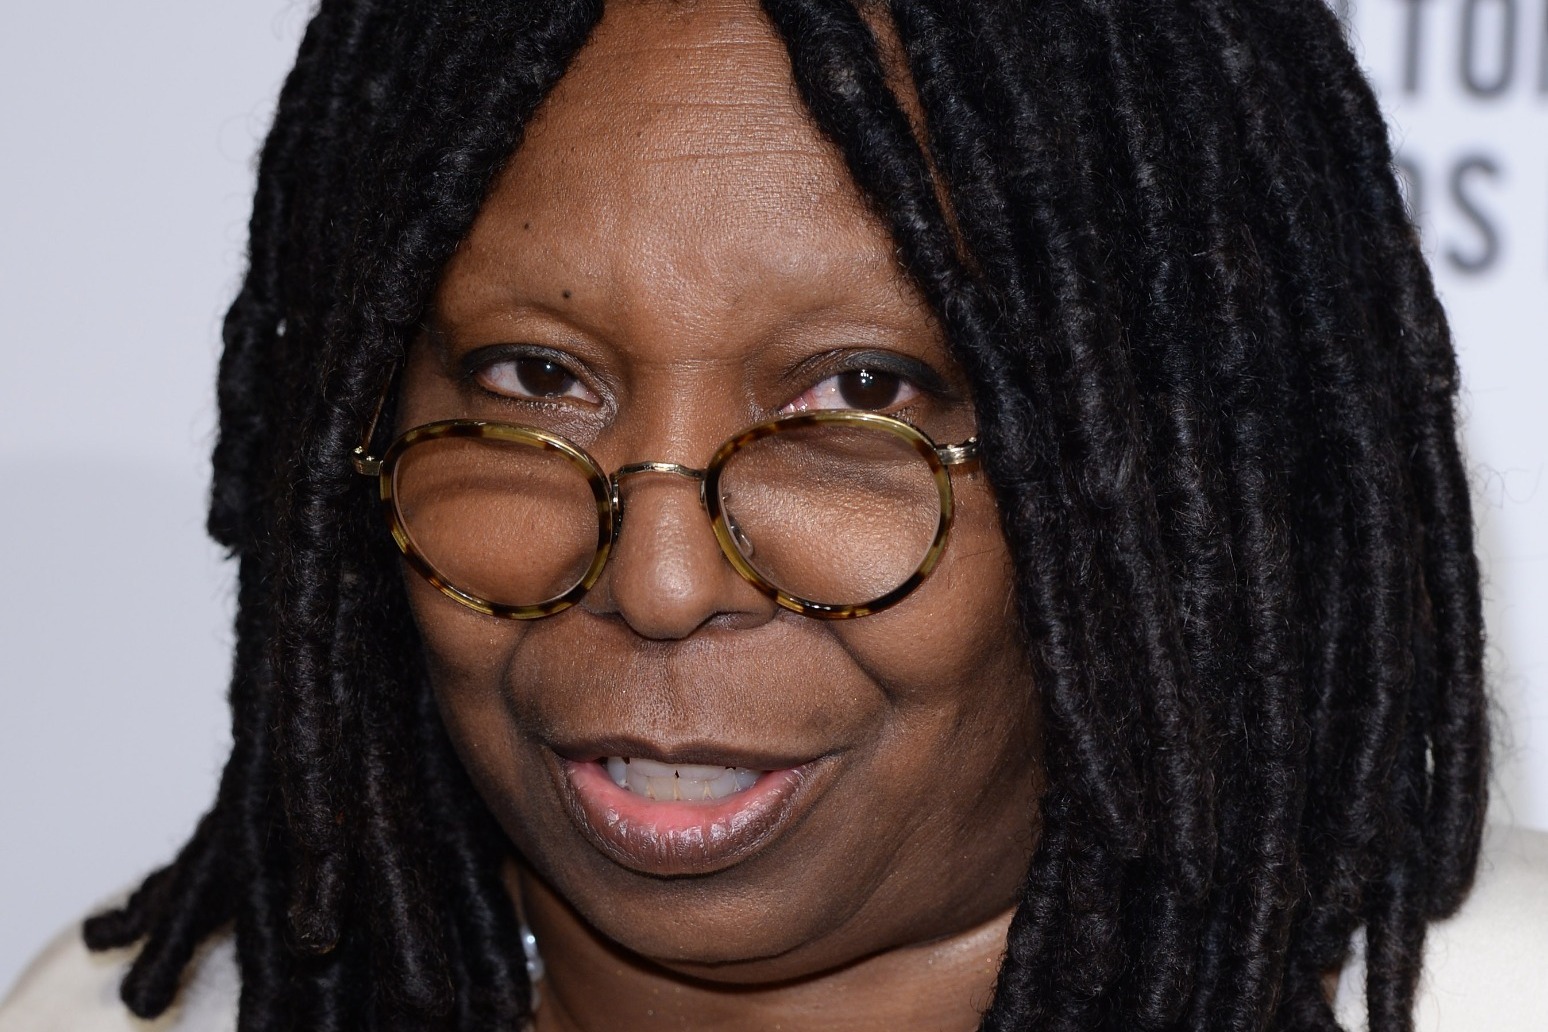 Whoopi Goldberg: Emmett Till’s story is the epitome of what hate can look like 